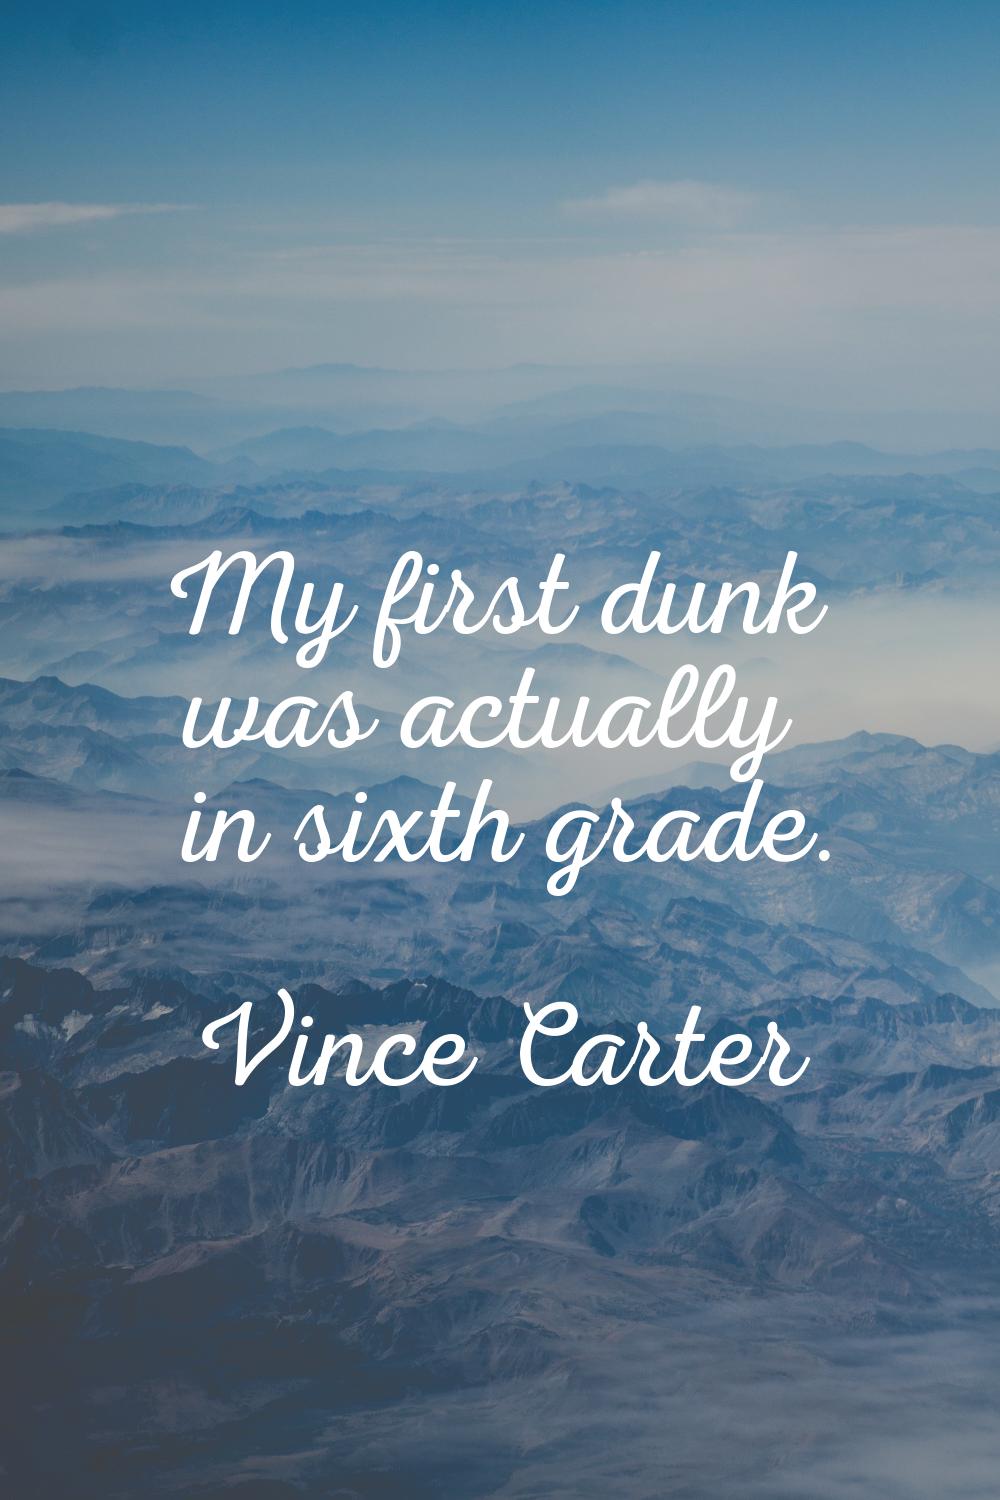 My first dunk was actually in sixth grade.